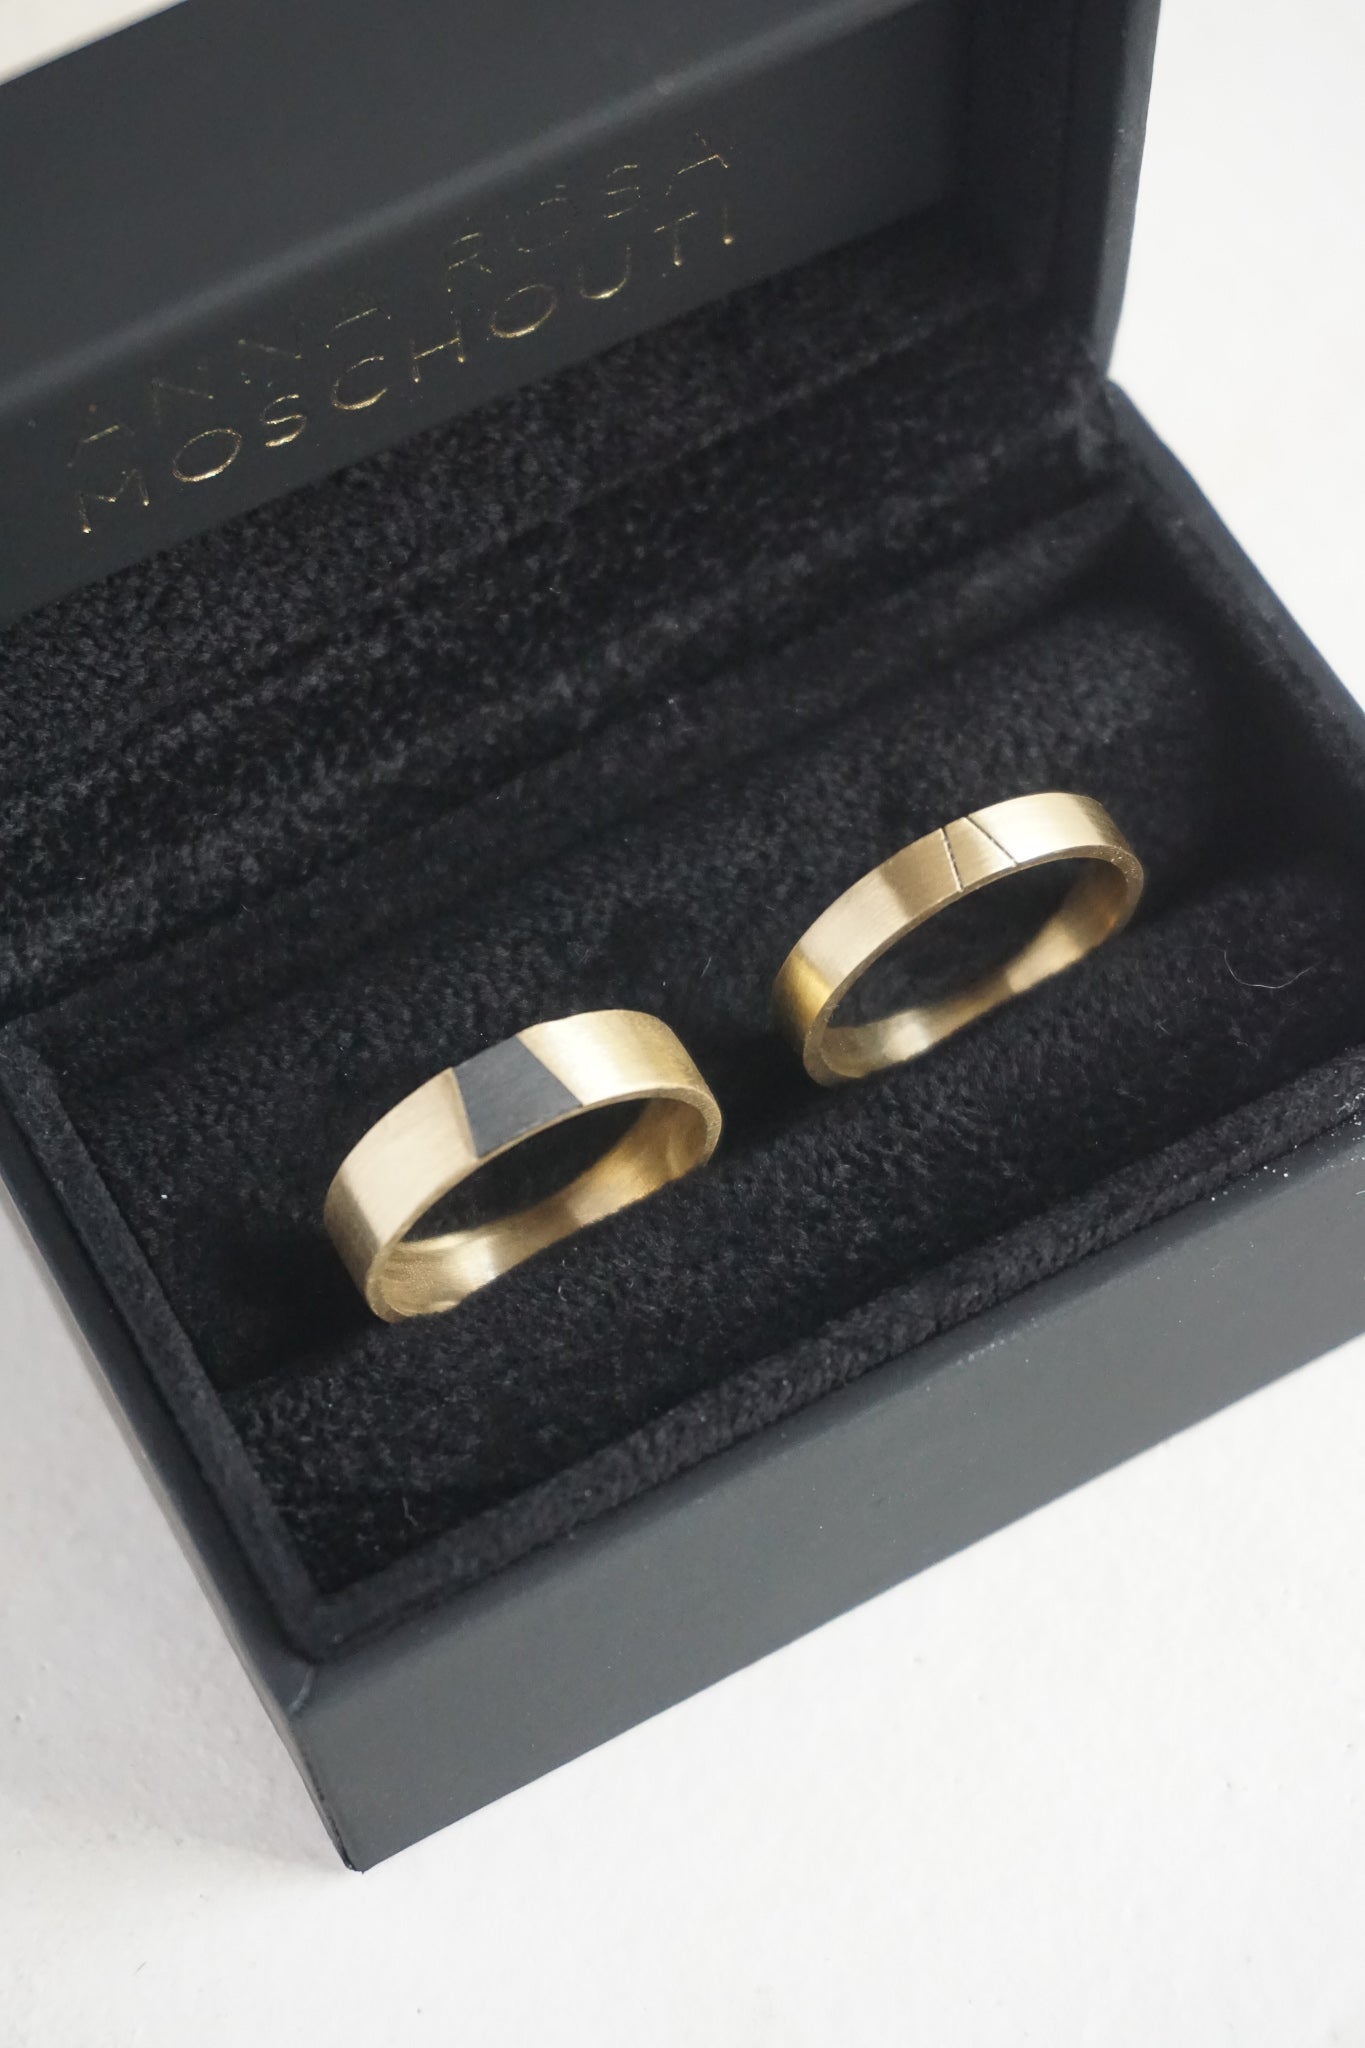 A Guide to Wedding Rings for Same-Sex Couples